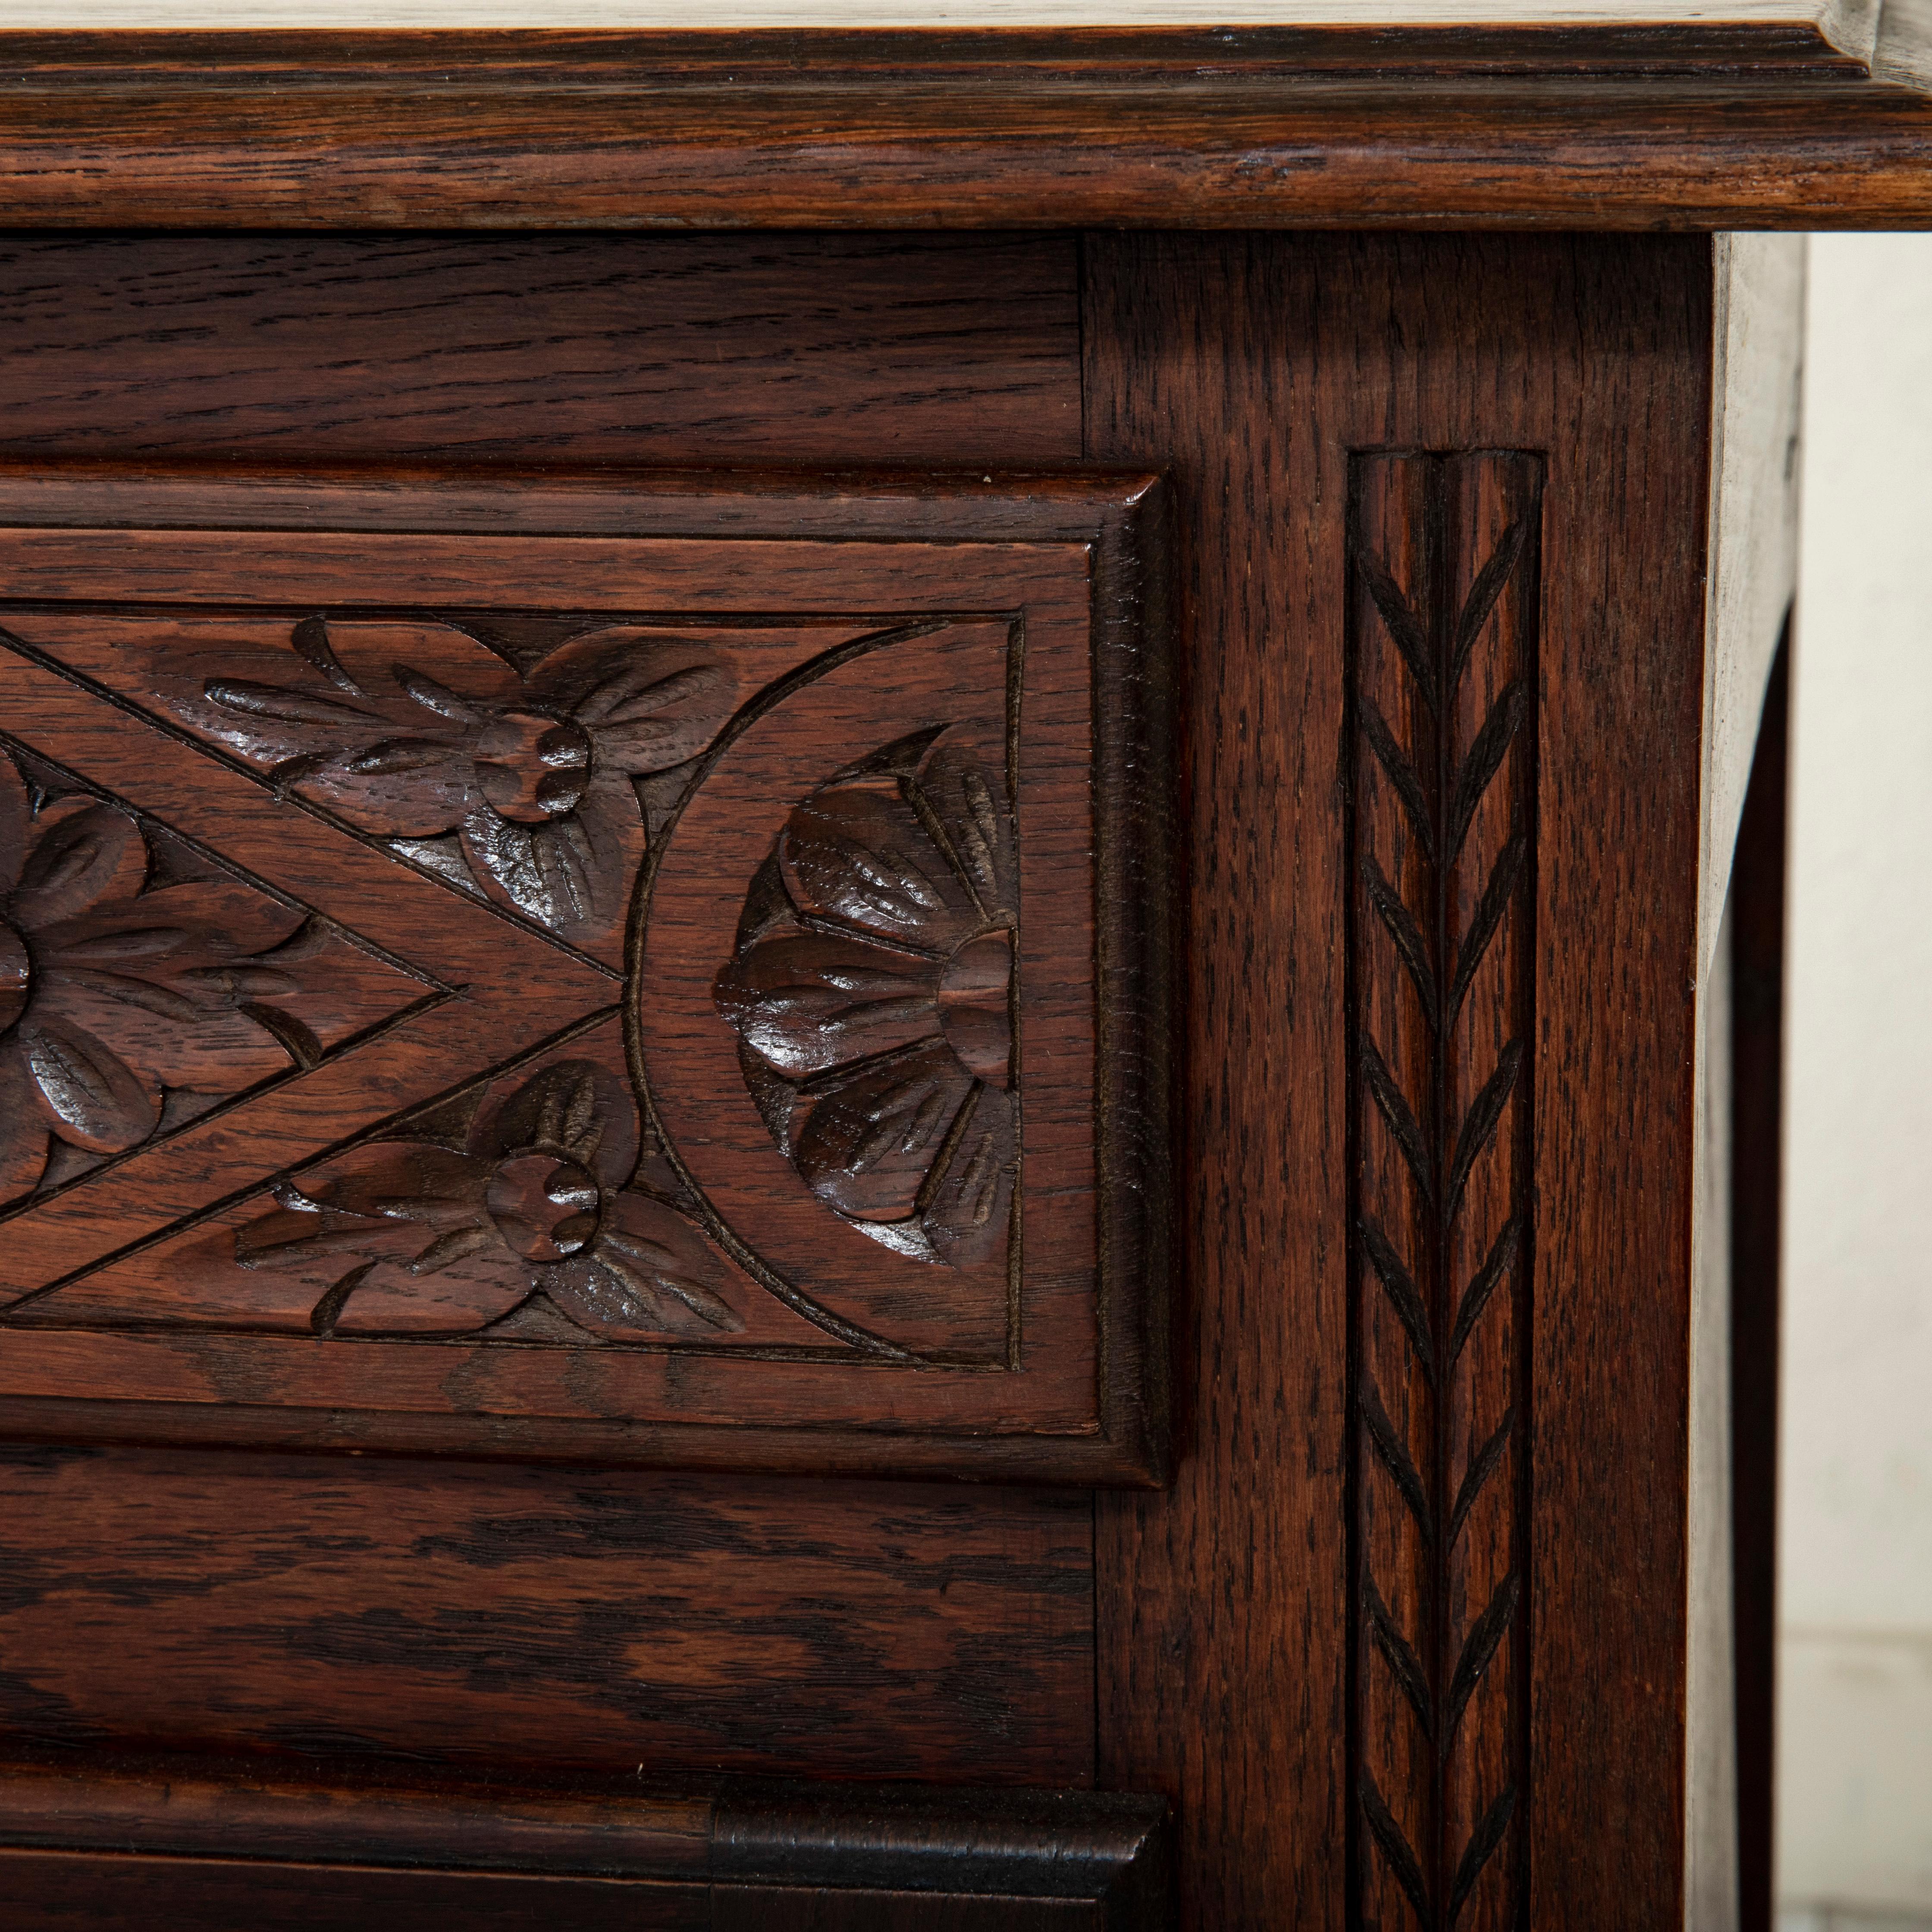 Early Twentieth century French Hand-Carved Oak Jam Cabinet from Brittany For Sale 6